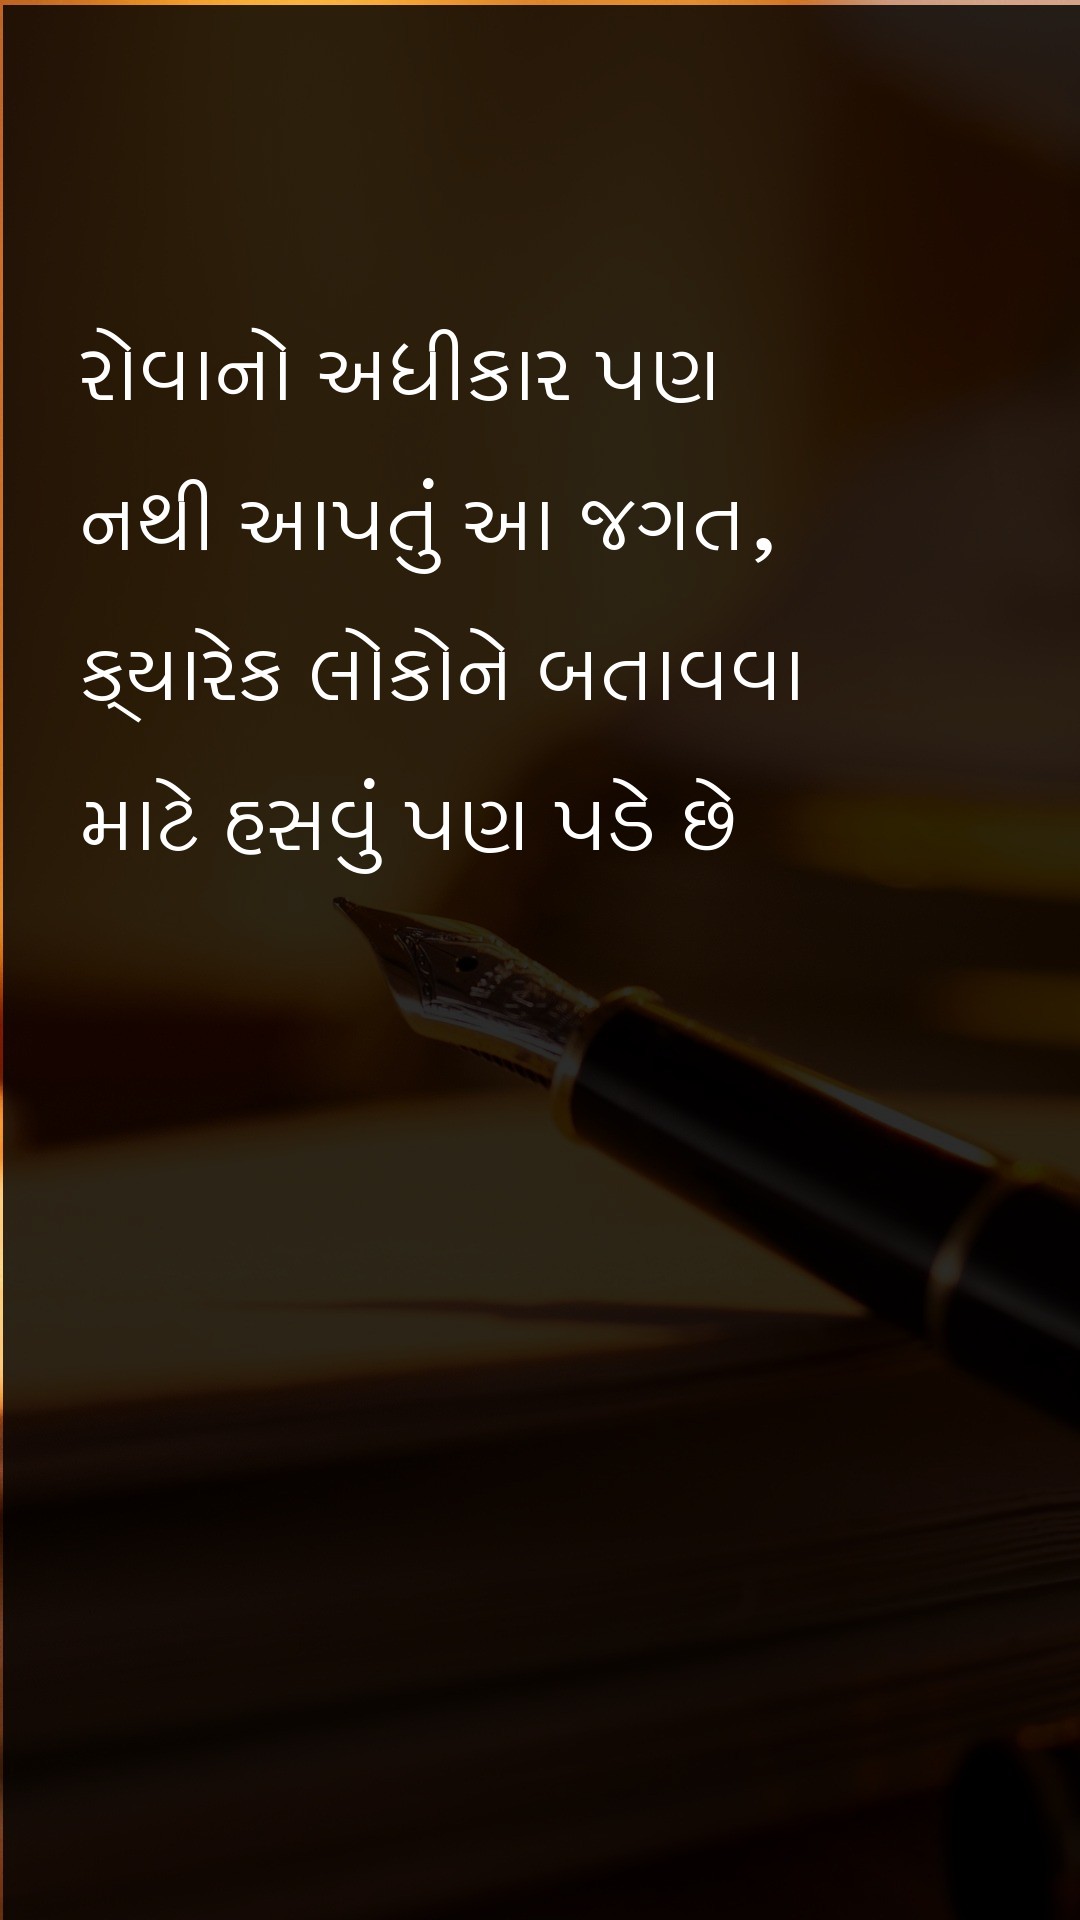 It doesnt even give the world the right to cry - Gujarati Quotes at statush.com